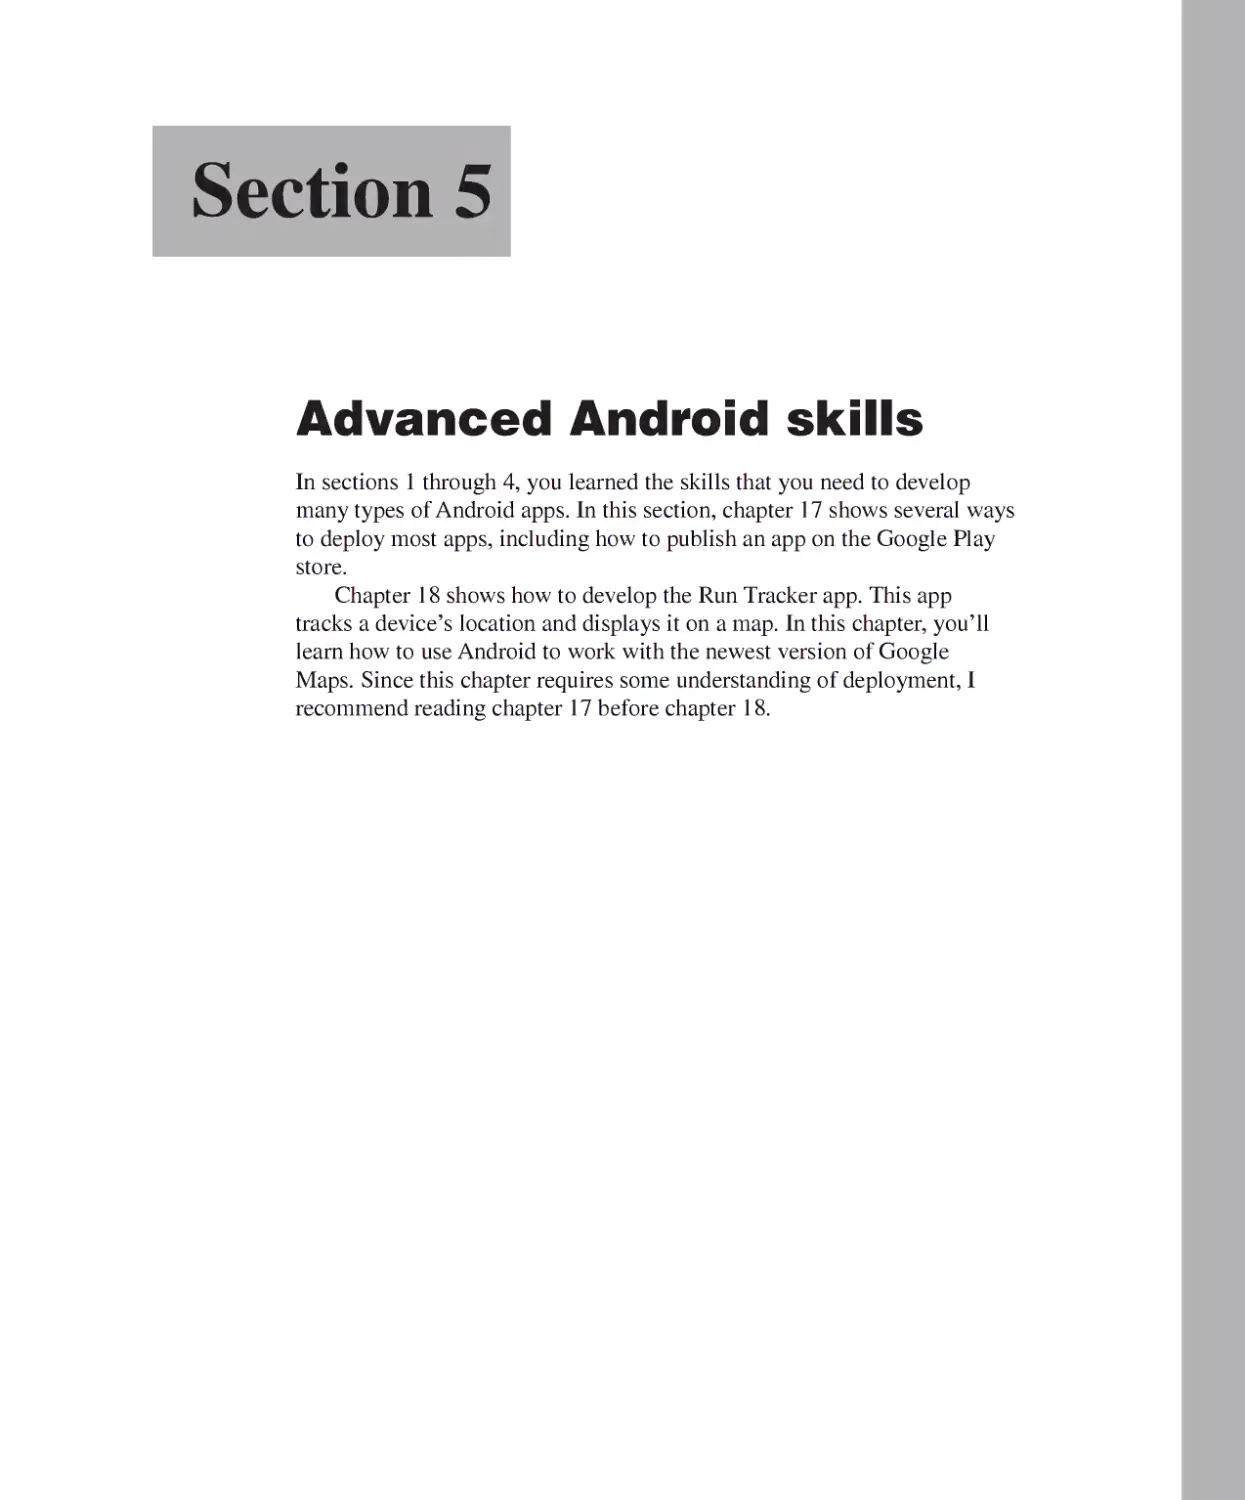 Section 5 - Advanced Android Skills